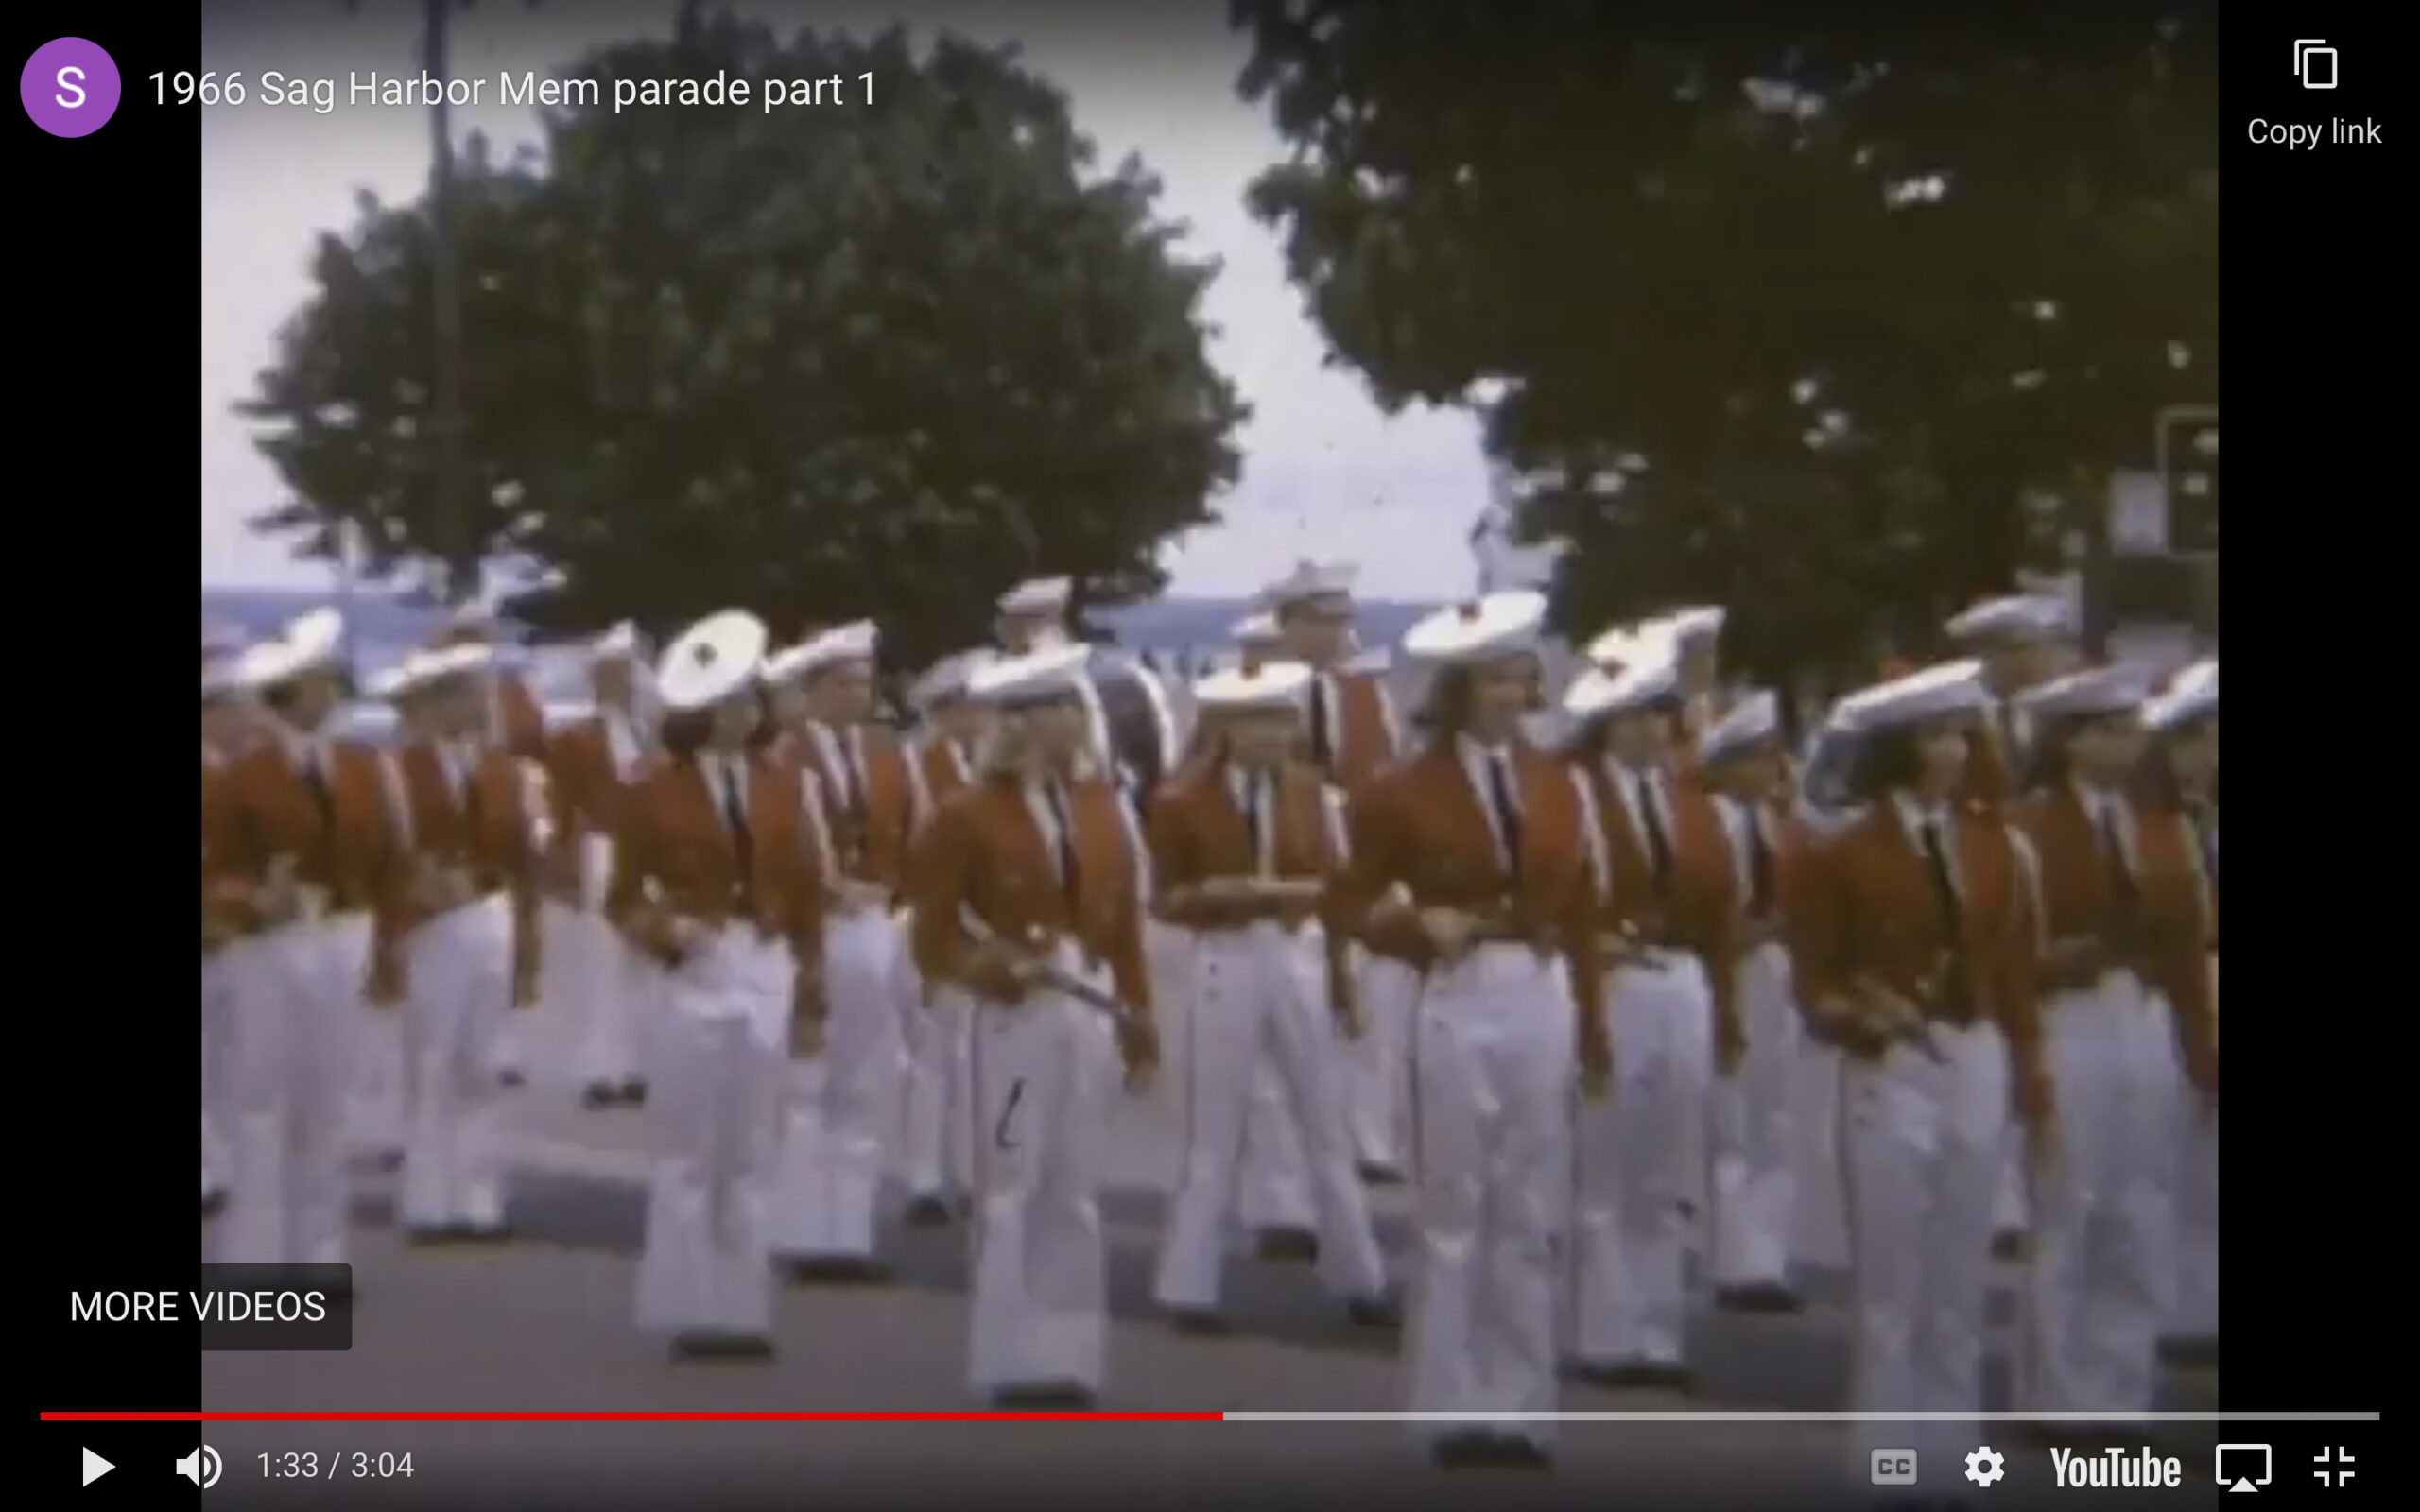 The Pierson High School Band in the 1966 Sag Harbor Memorial Day parade.